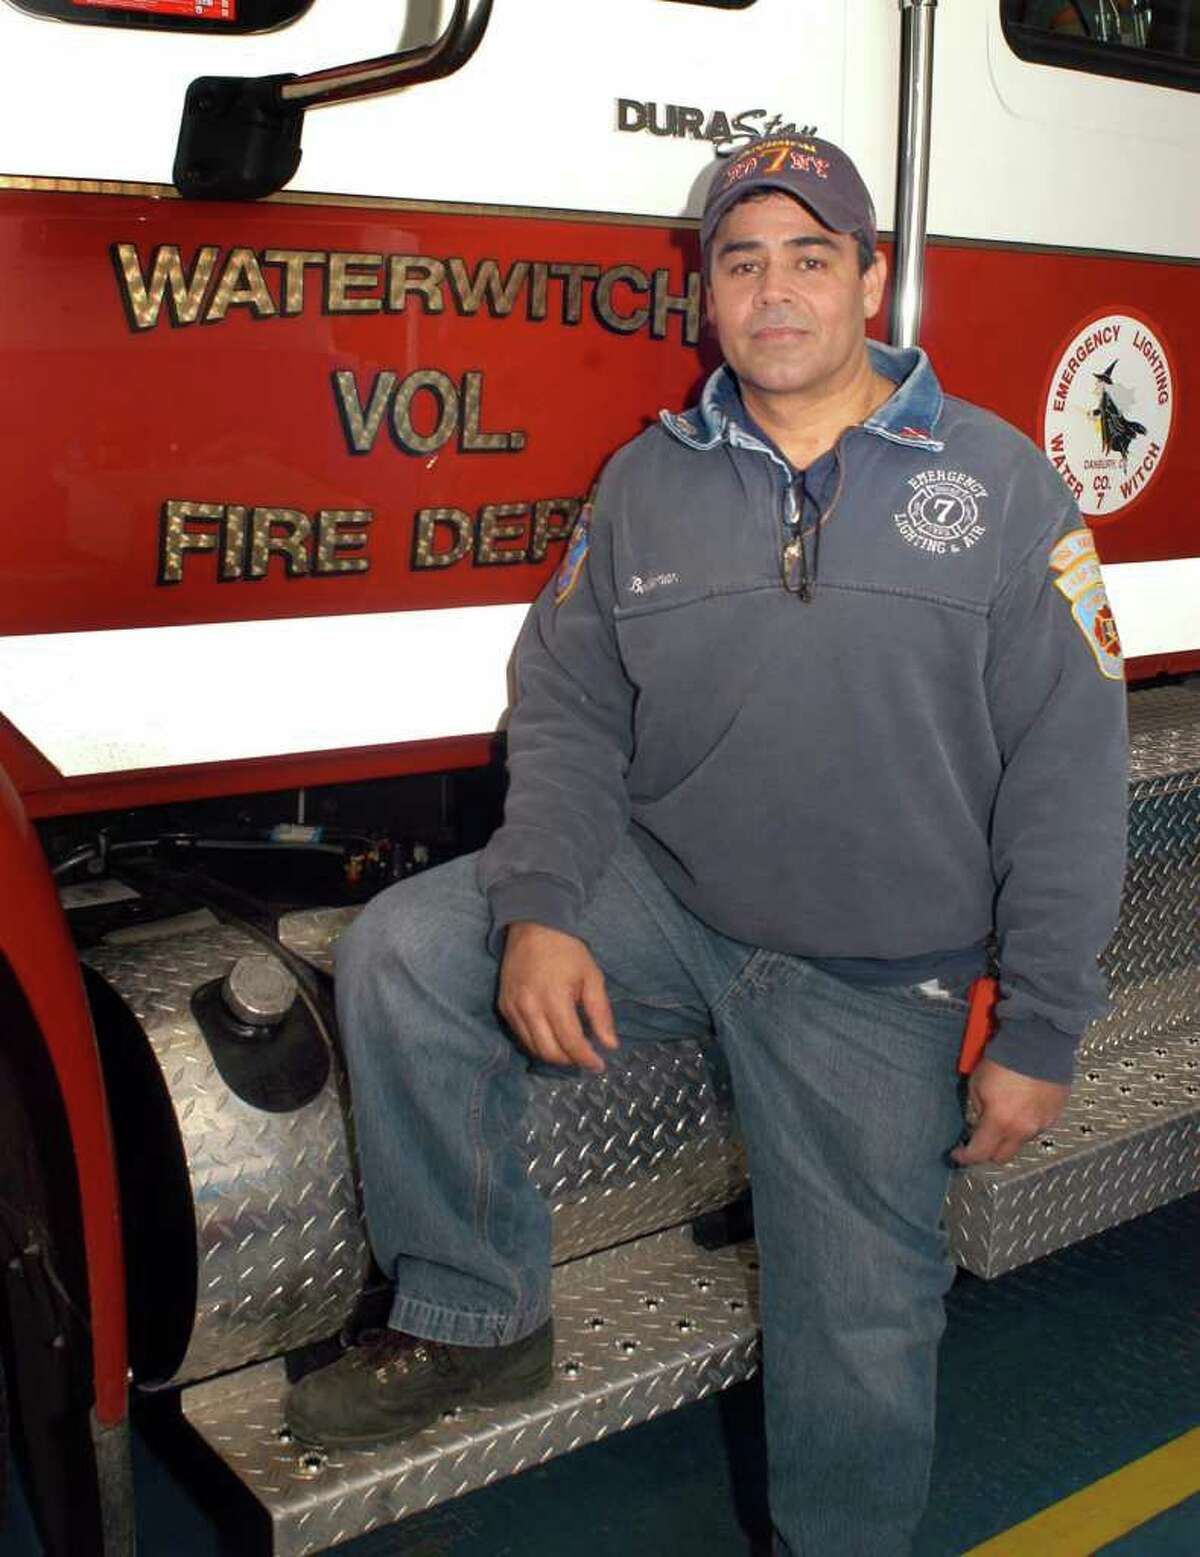 Dave Torres, captain with the Waterwitch volunteer fire company in Danbury, was recently honored as Danbury’s Volunteer Firefighter of the Year